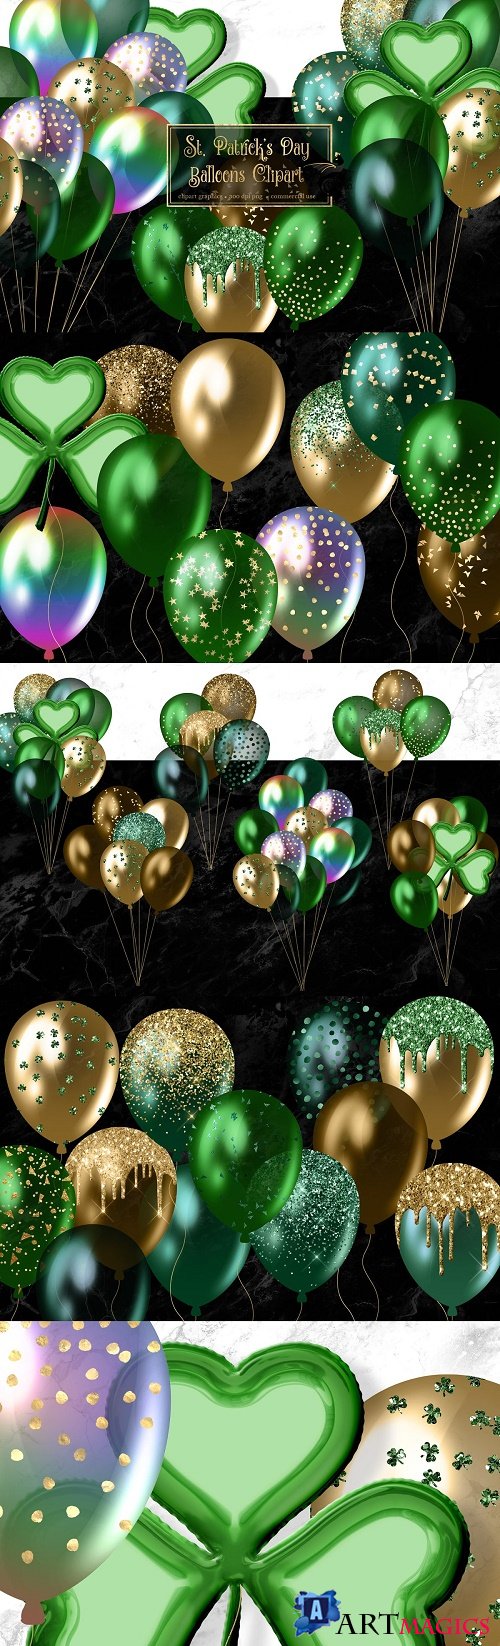 St Patrick's Day Balloons Clipart - 4459798